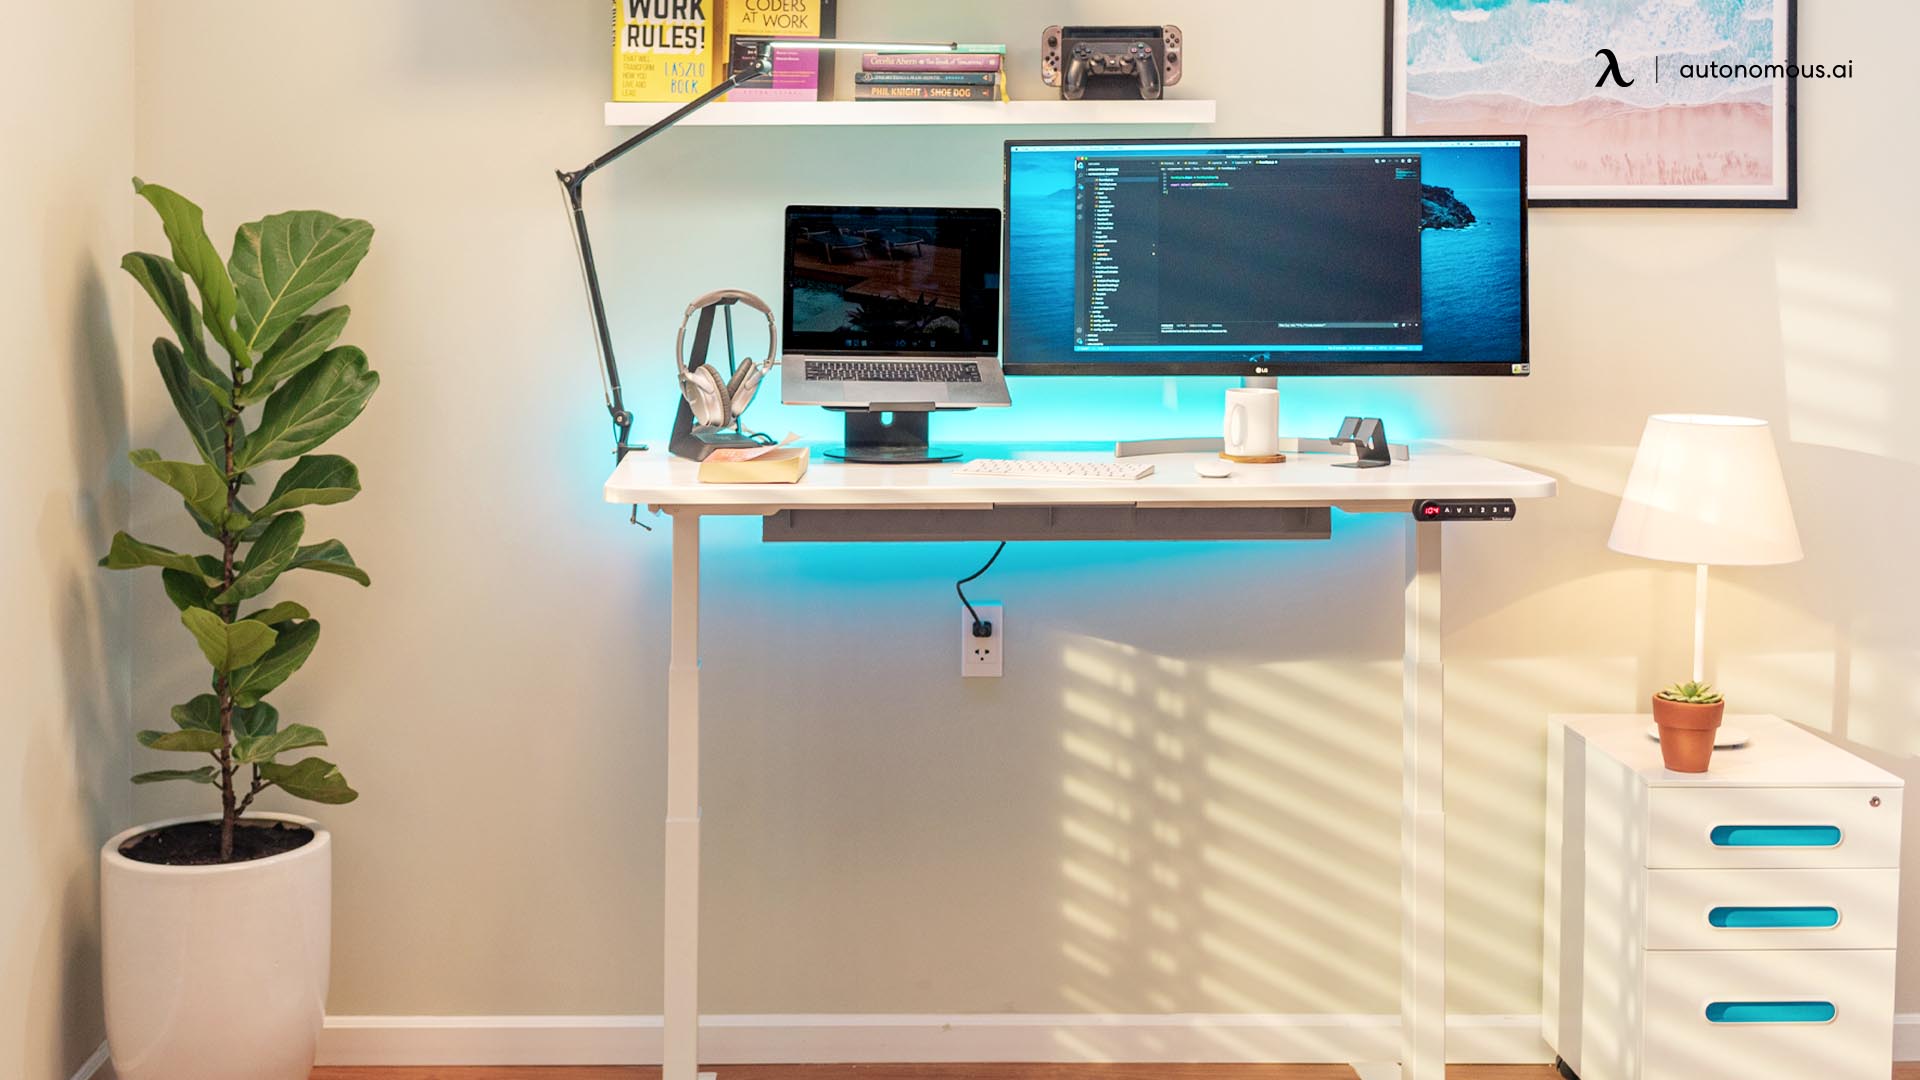 Change your workspace look frequently